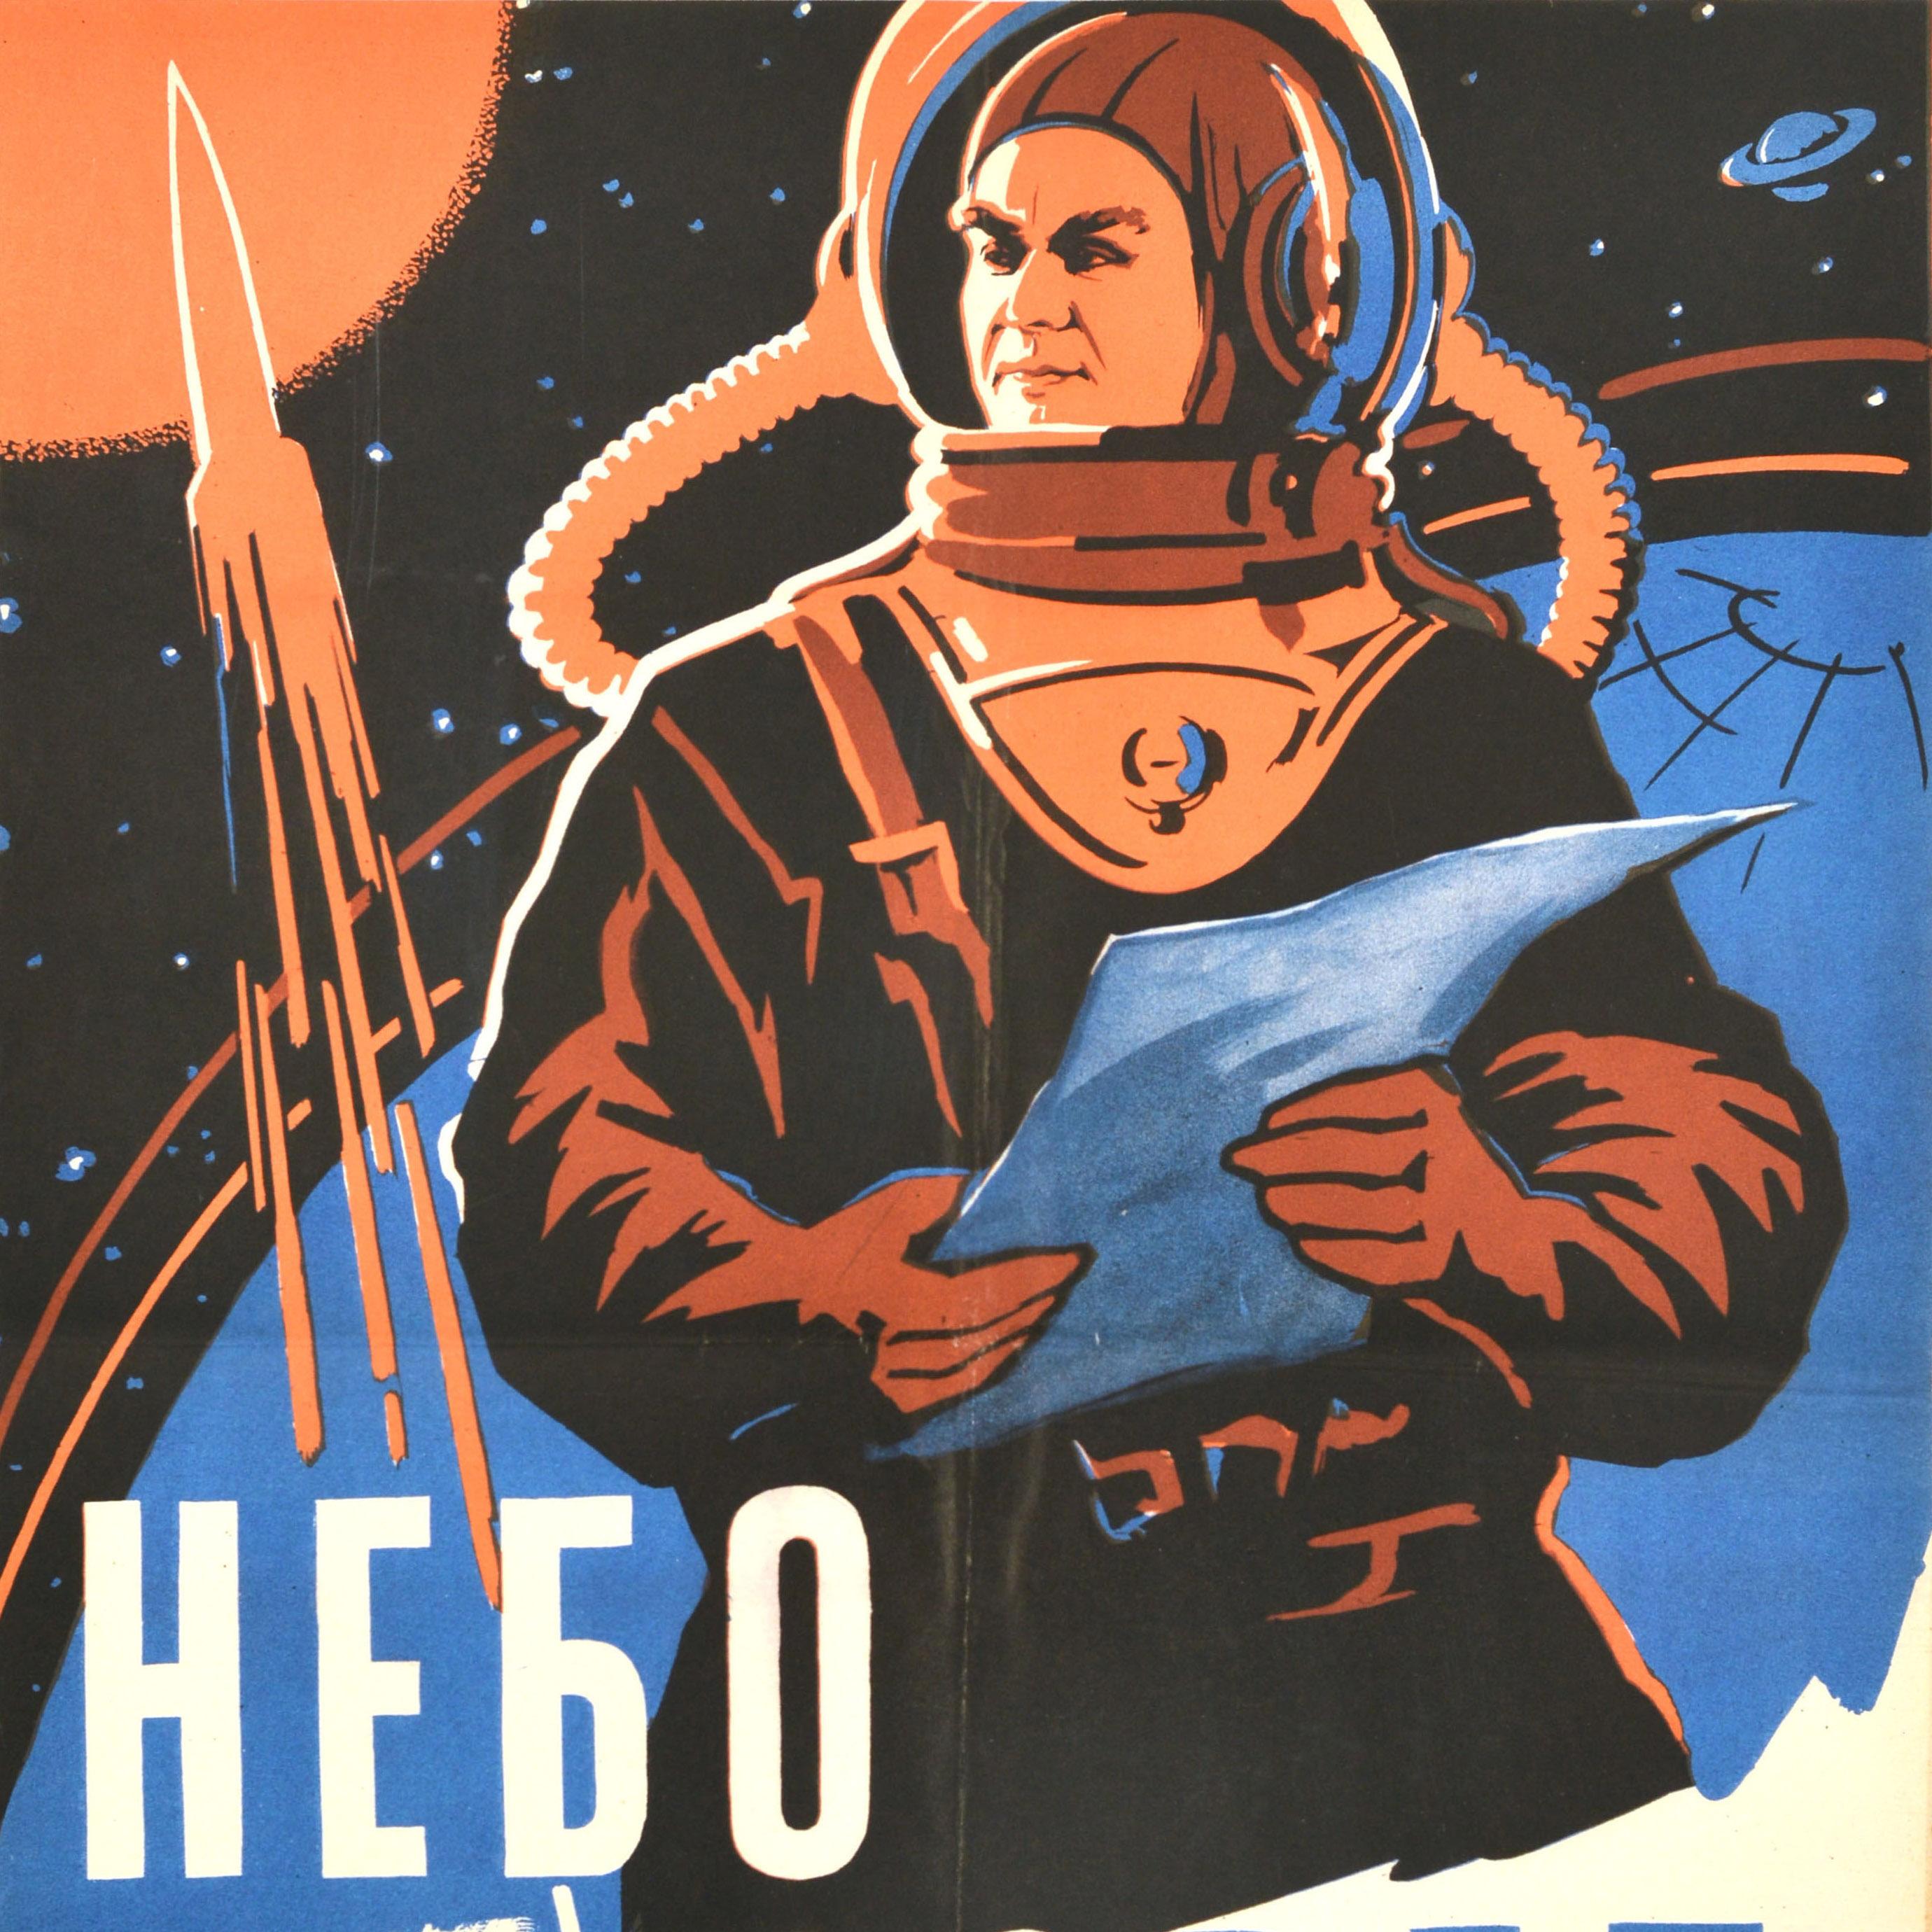 Original vintage Russian sci-fi movie poster for the film Nebo Zovyot / ???? ????? / Battle Beyond the Sun about a space race to be the first to land on Mars - a science fiction thriller directed by Mikhail Karzhukov and Aleksandr Kozyr, starring